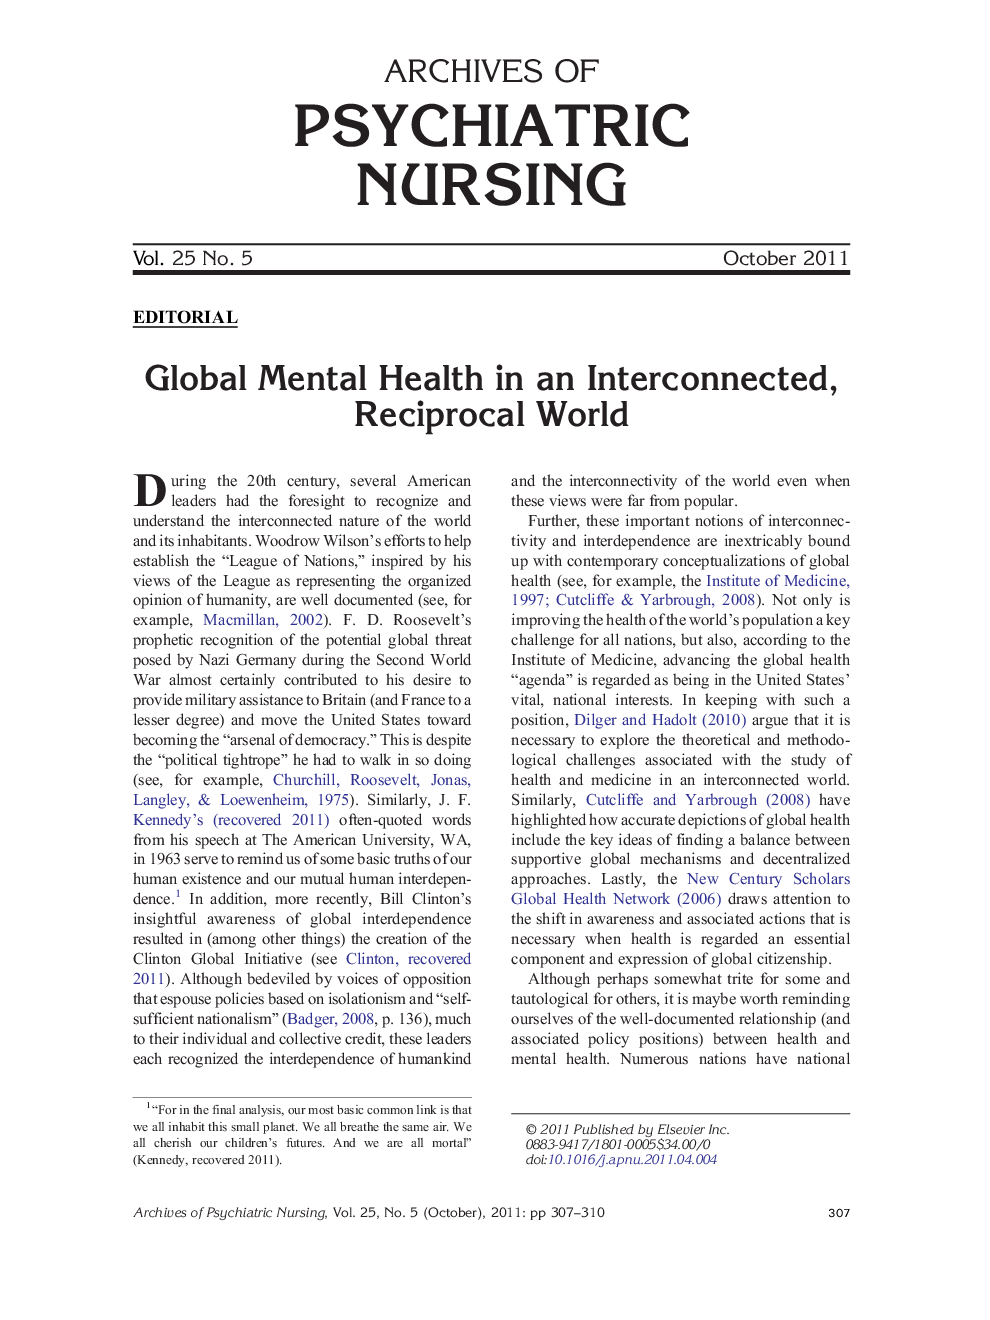 Global Mental Health in an Interconnected, Reciprocal World